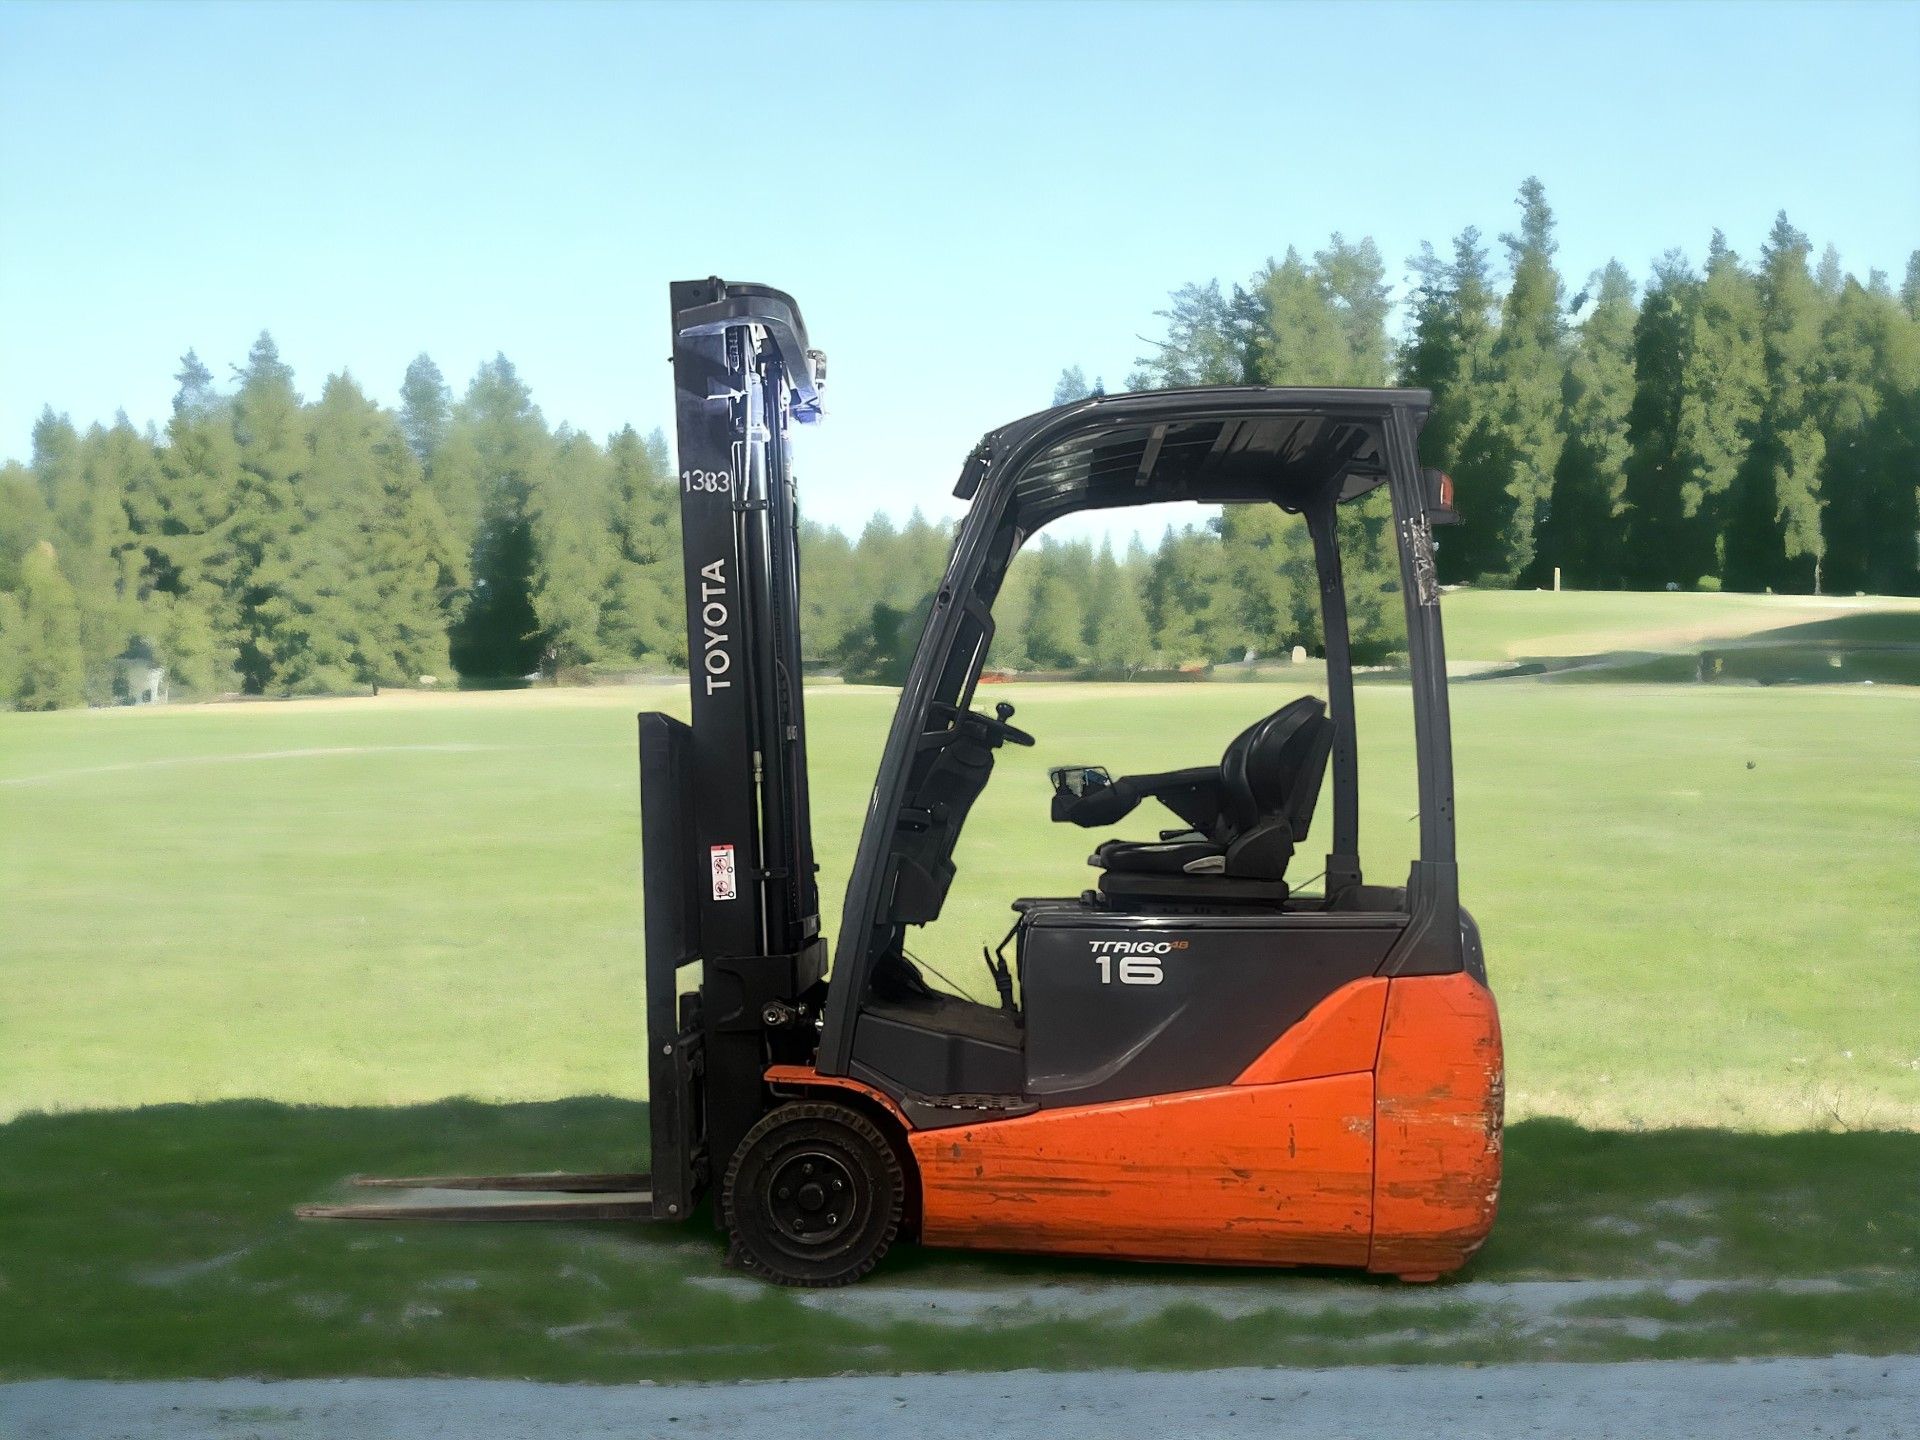 TOYOTA ELECTRIC 3-WHEEL FORKLIFT - 8FBET16 (2012) **(INCLUDES CHARGER)**